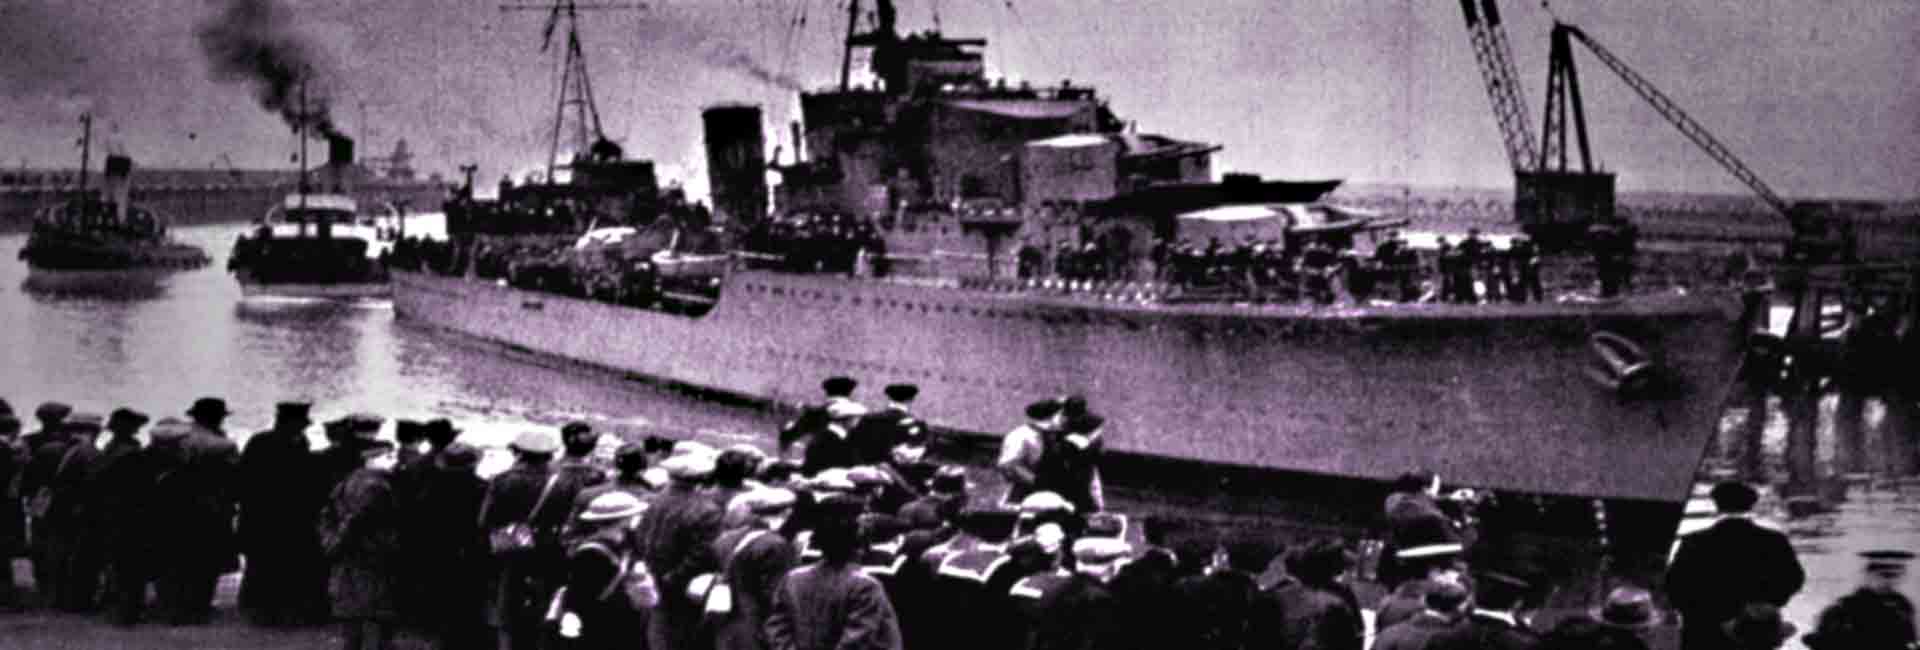 HMS Cossack arrives in Leith, greeted by onlookers